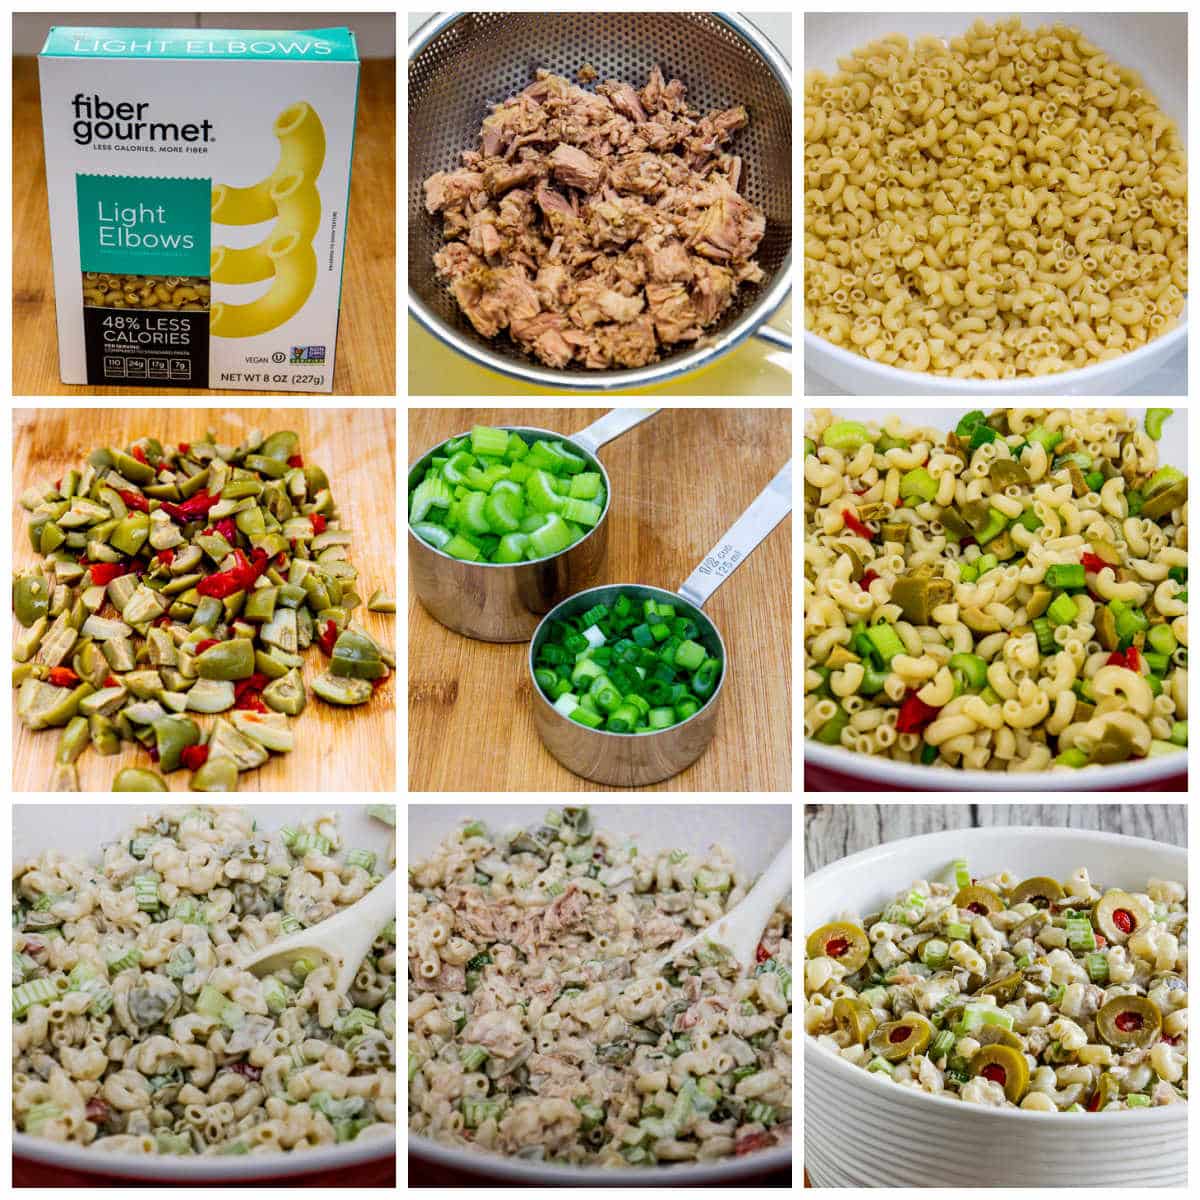 Tuna Macaroni Salad with Green Olives from the recipe steps collection